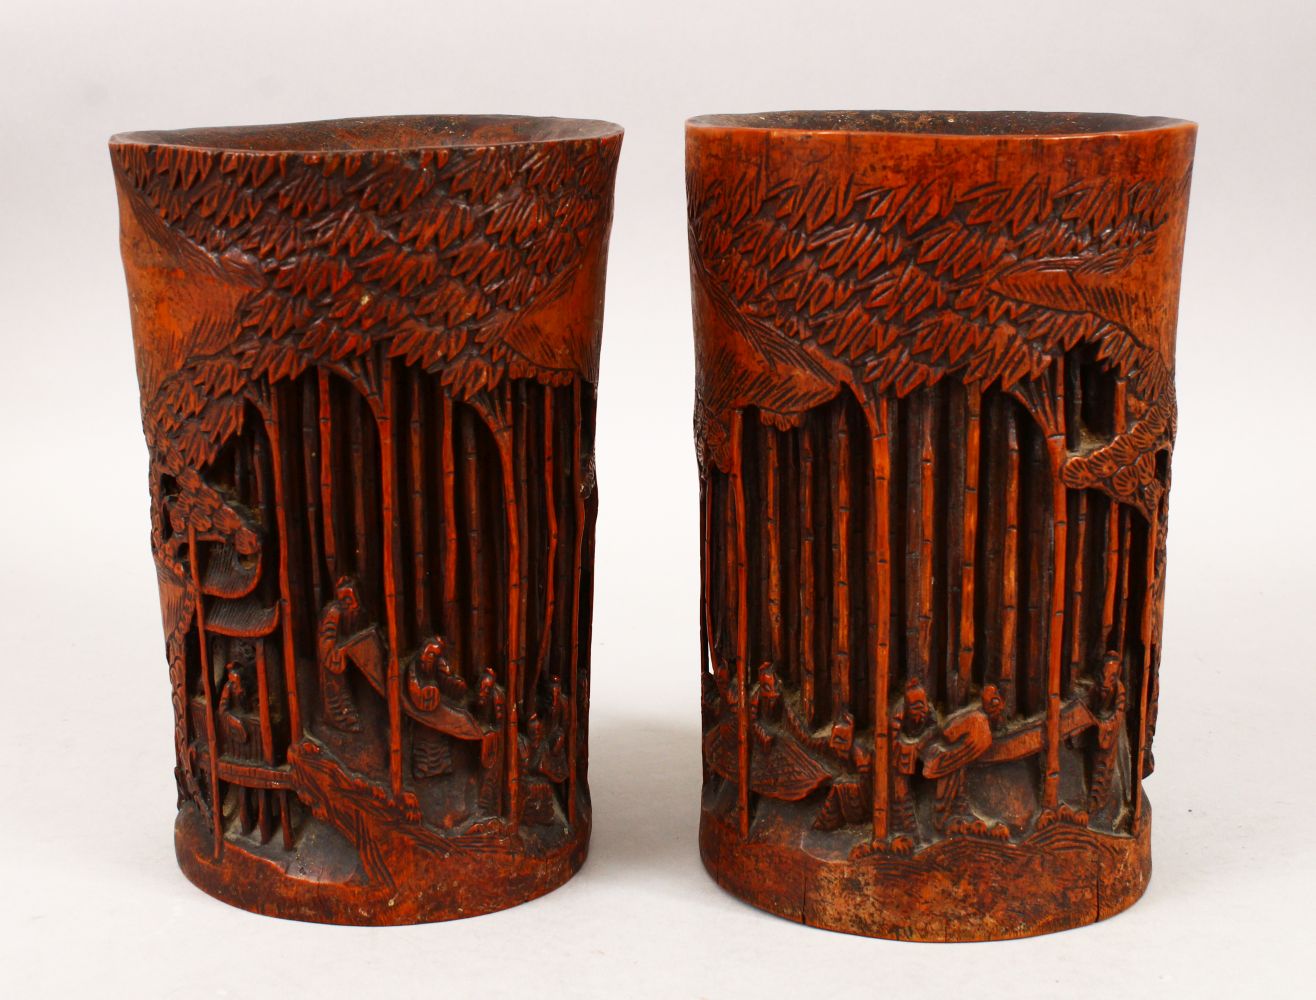 A GOOD PAIR OF 19TH CENTURY CHINESE BAMBOO BRUSH POTS, each decorated in relief to depict working